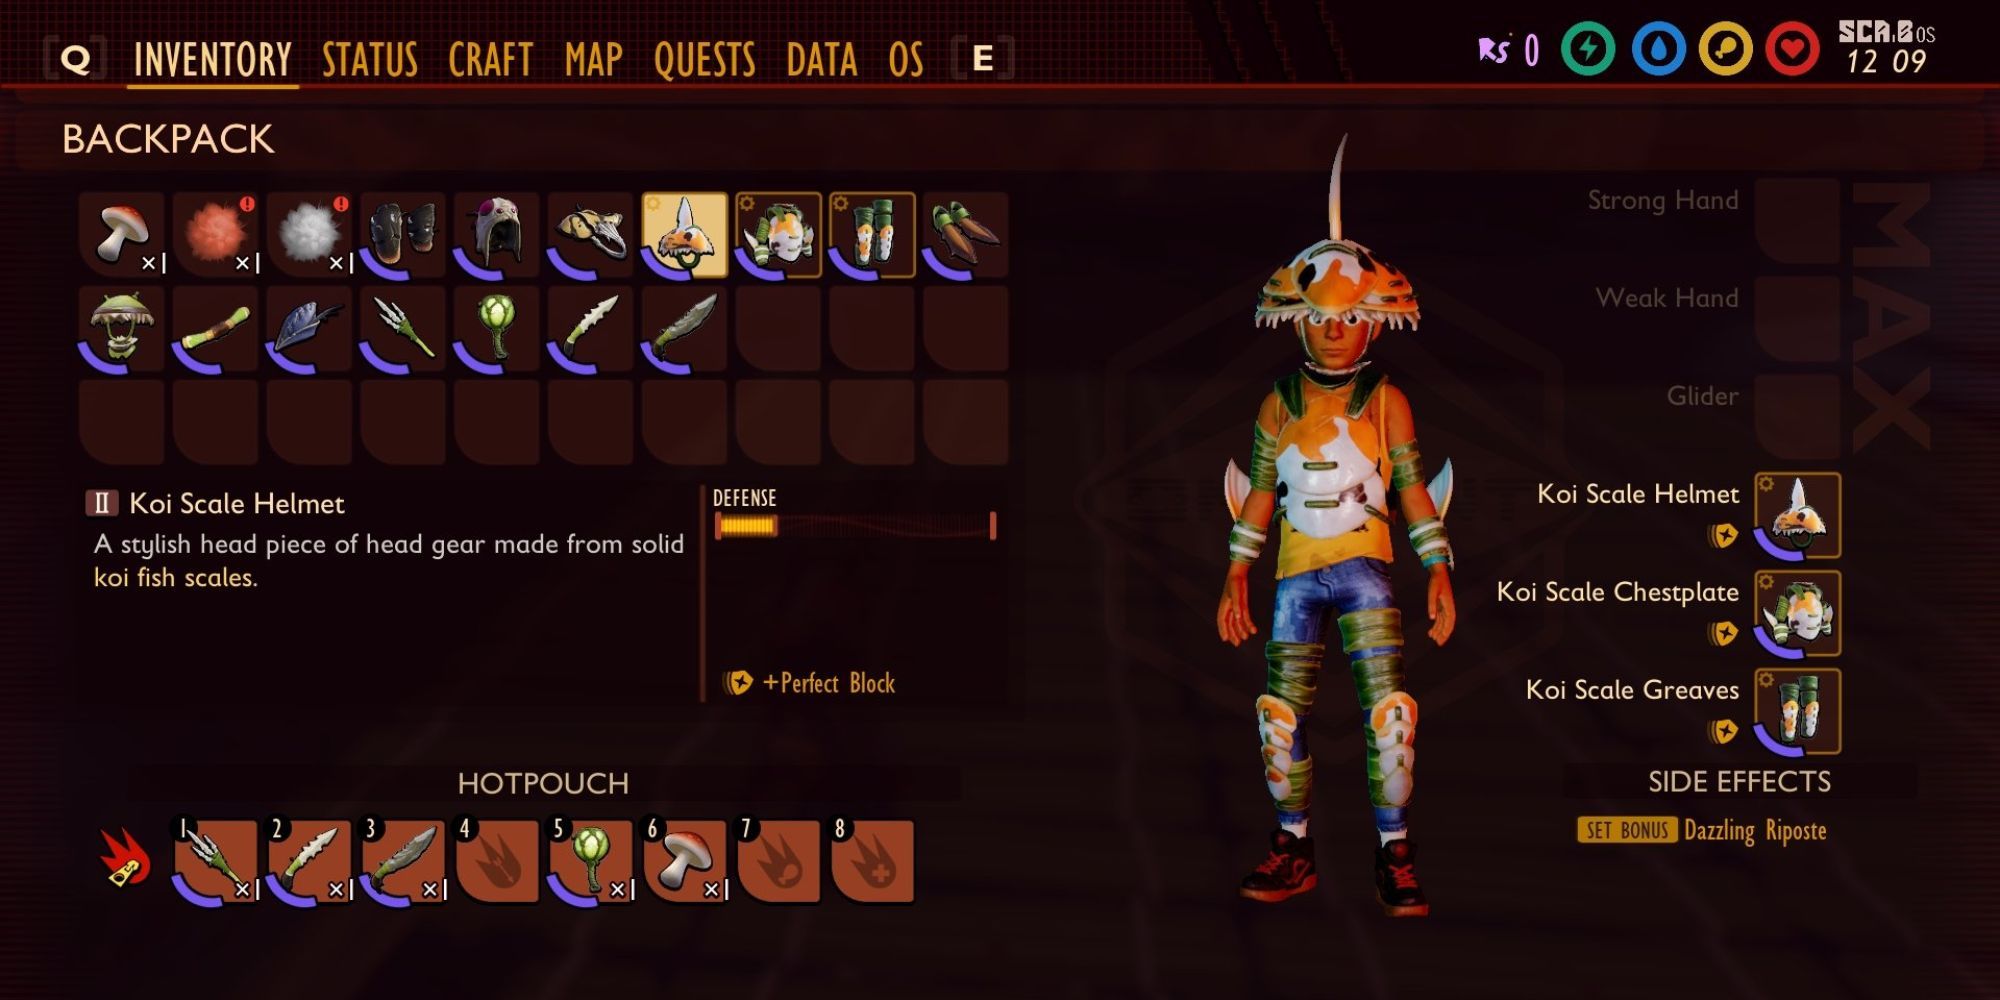 Koi Scale Armor displayed on Max in his inventory in Grounded.